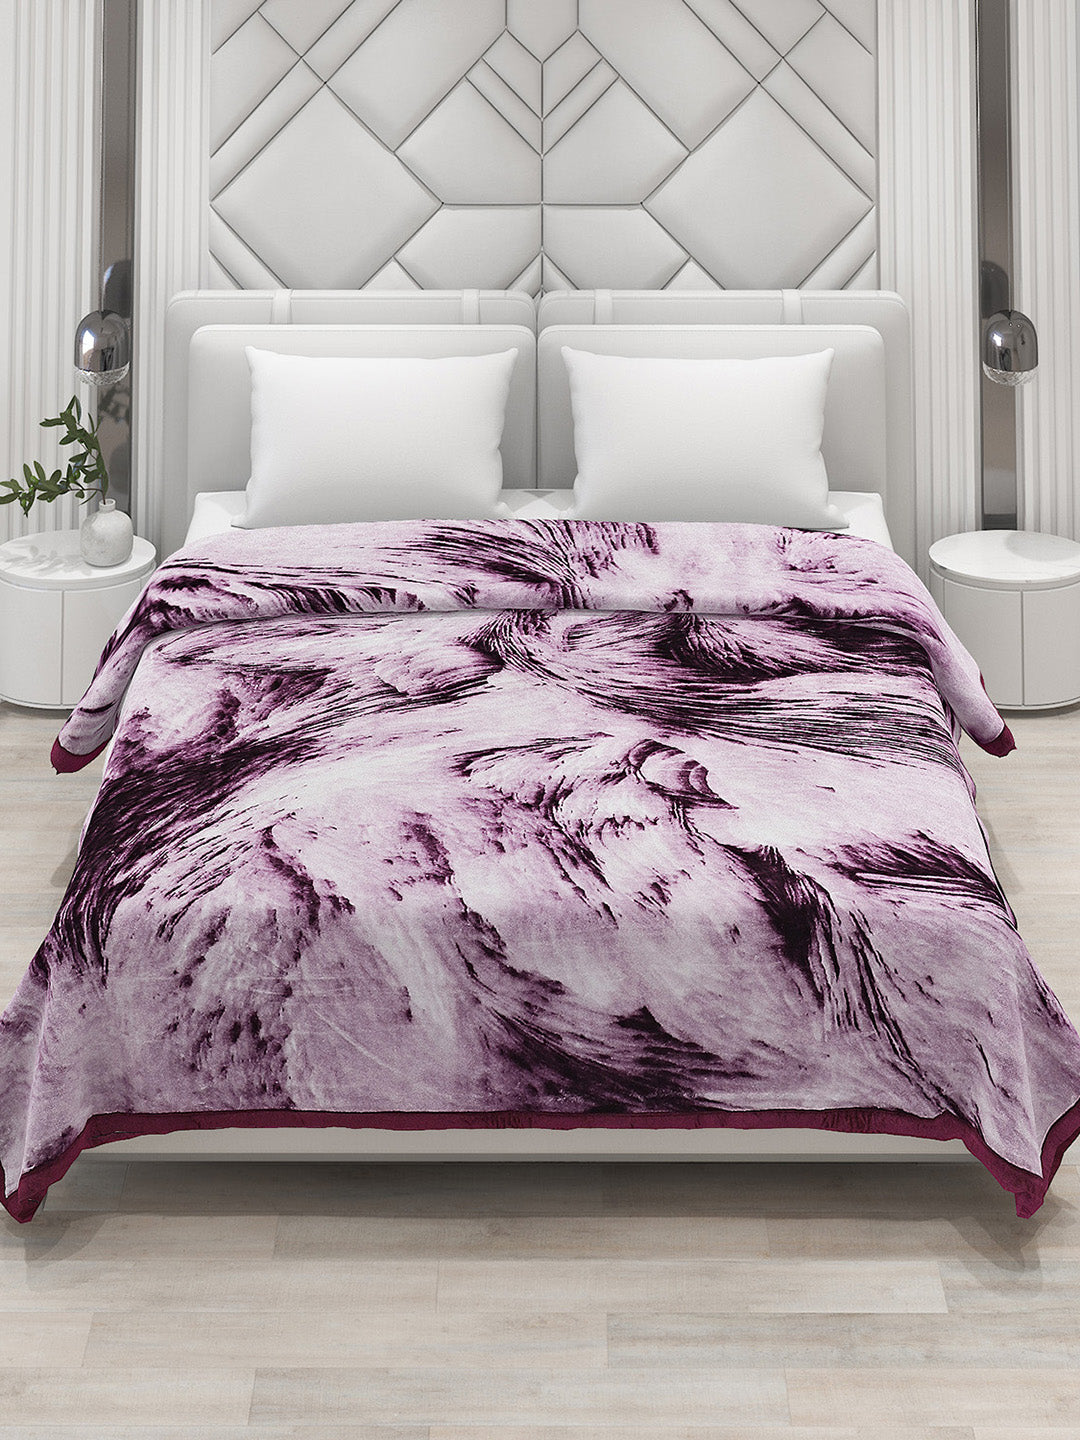 Printed Double Bed Blanket for Mild Winter -2 Ply